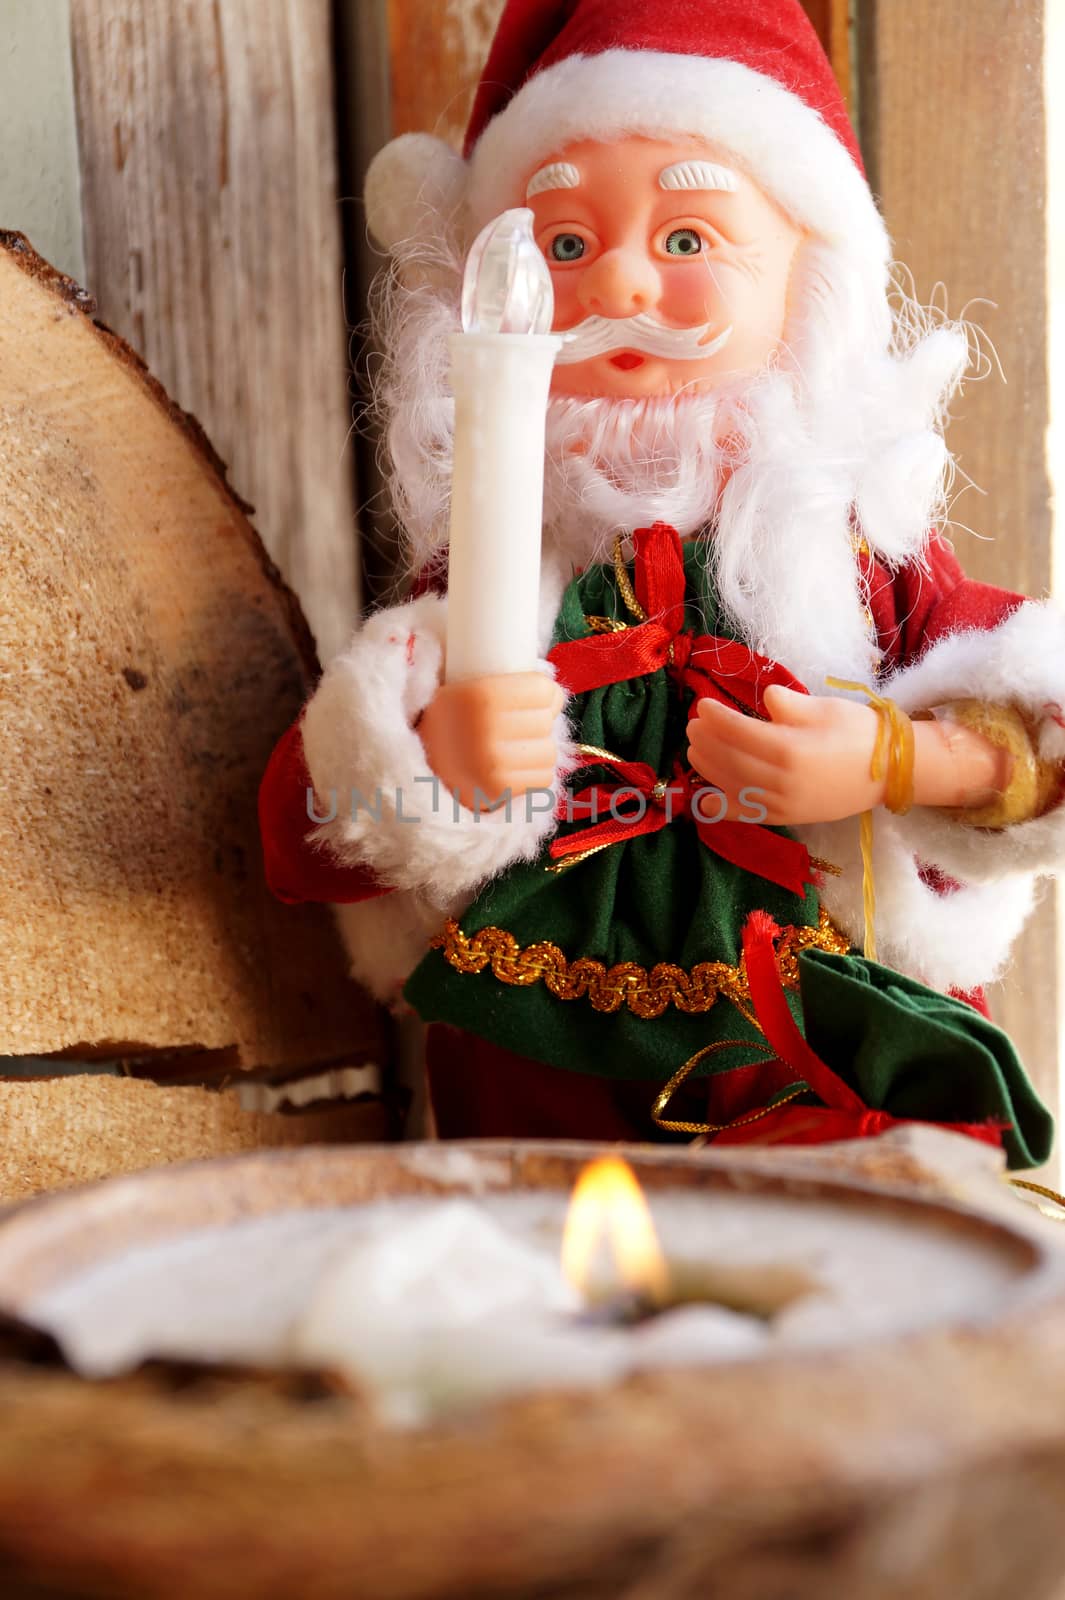 Santa Claus and a candle in a coconut by Vadimdem